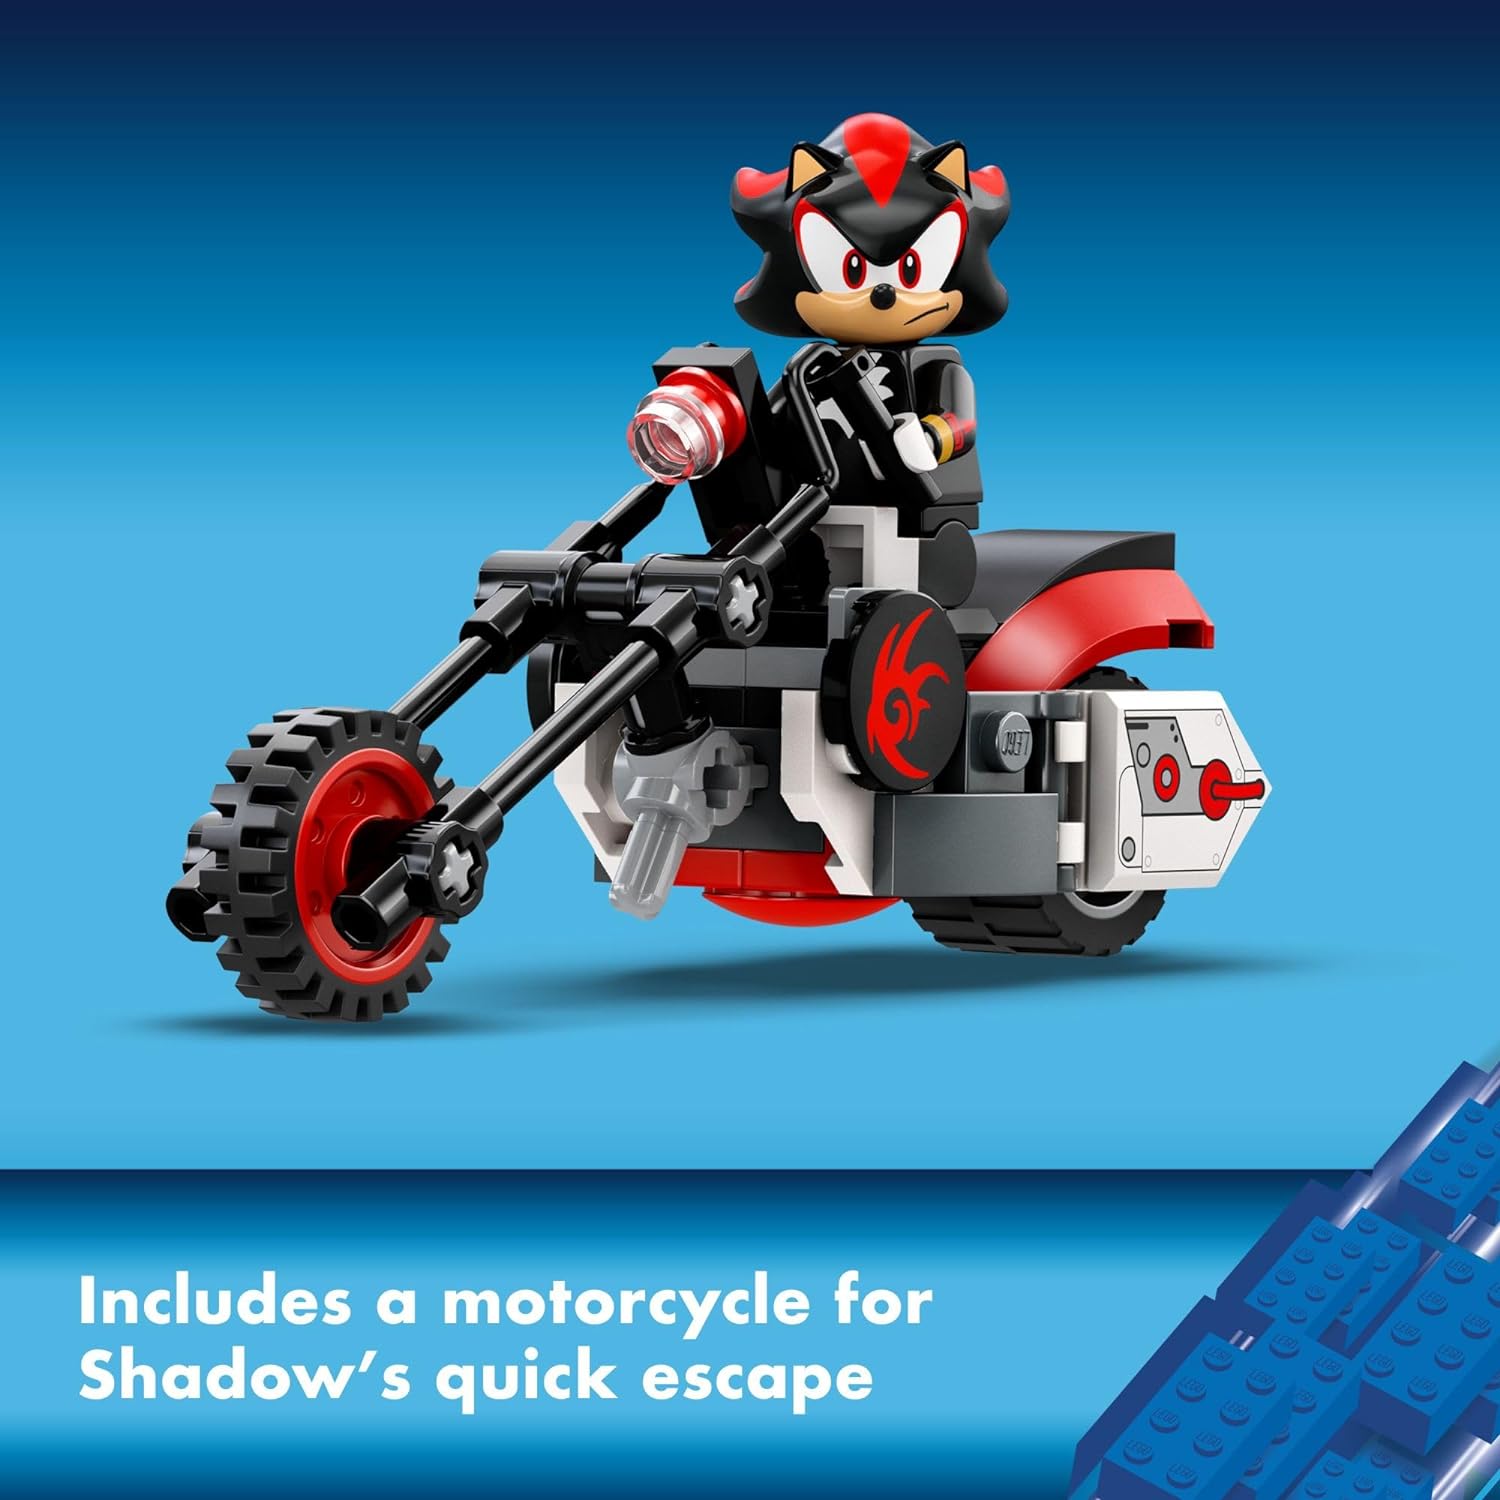 LEGO 76995 Sonic The Hedgehog Shadow The Hedgehog Escape Building Set, Motorcycle Toy, Video Game Character Figures, Sonic Toy for Kids.